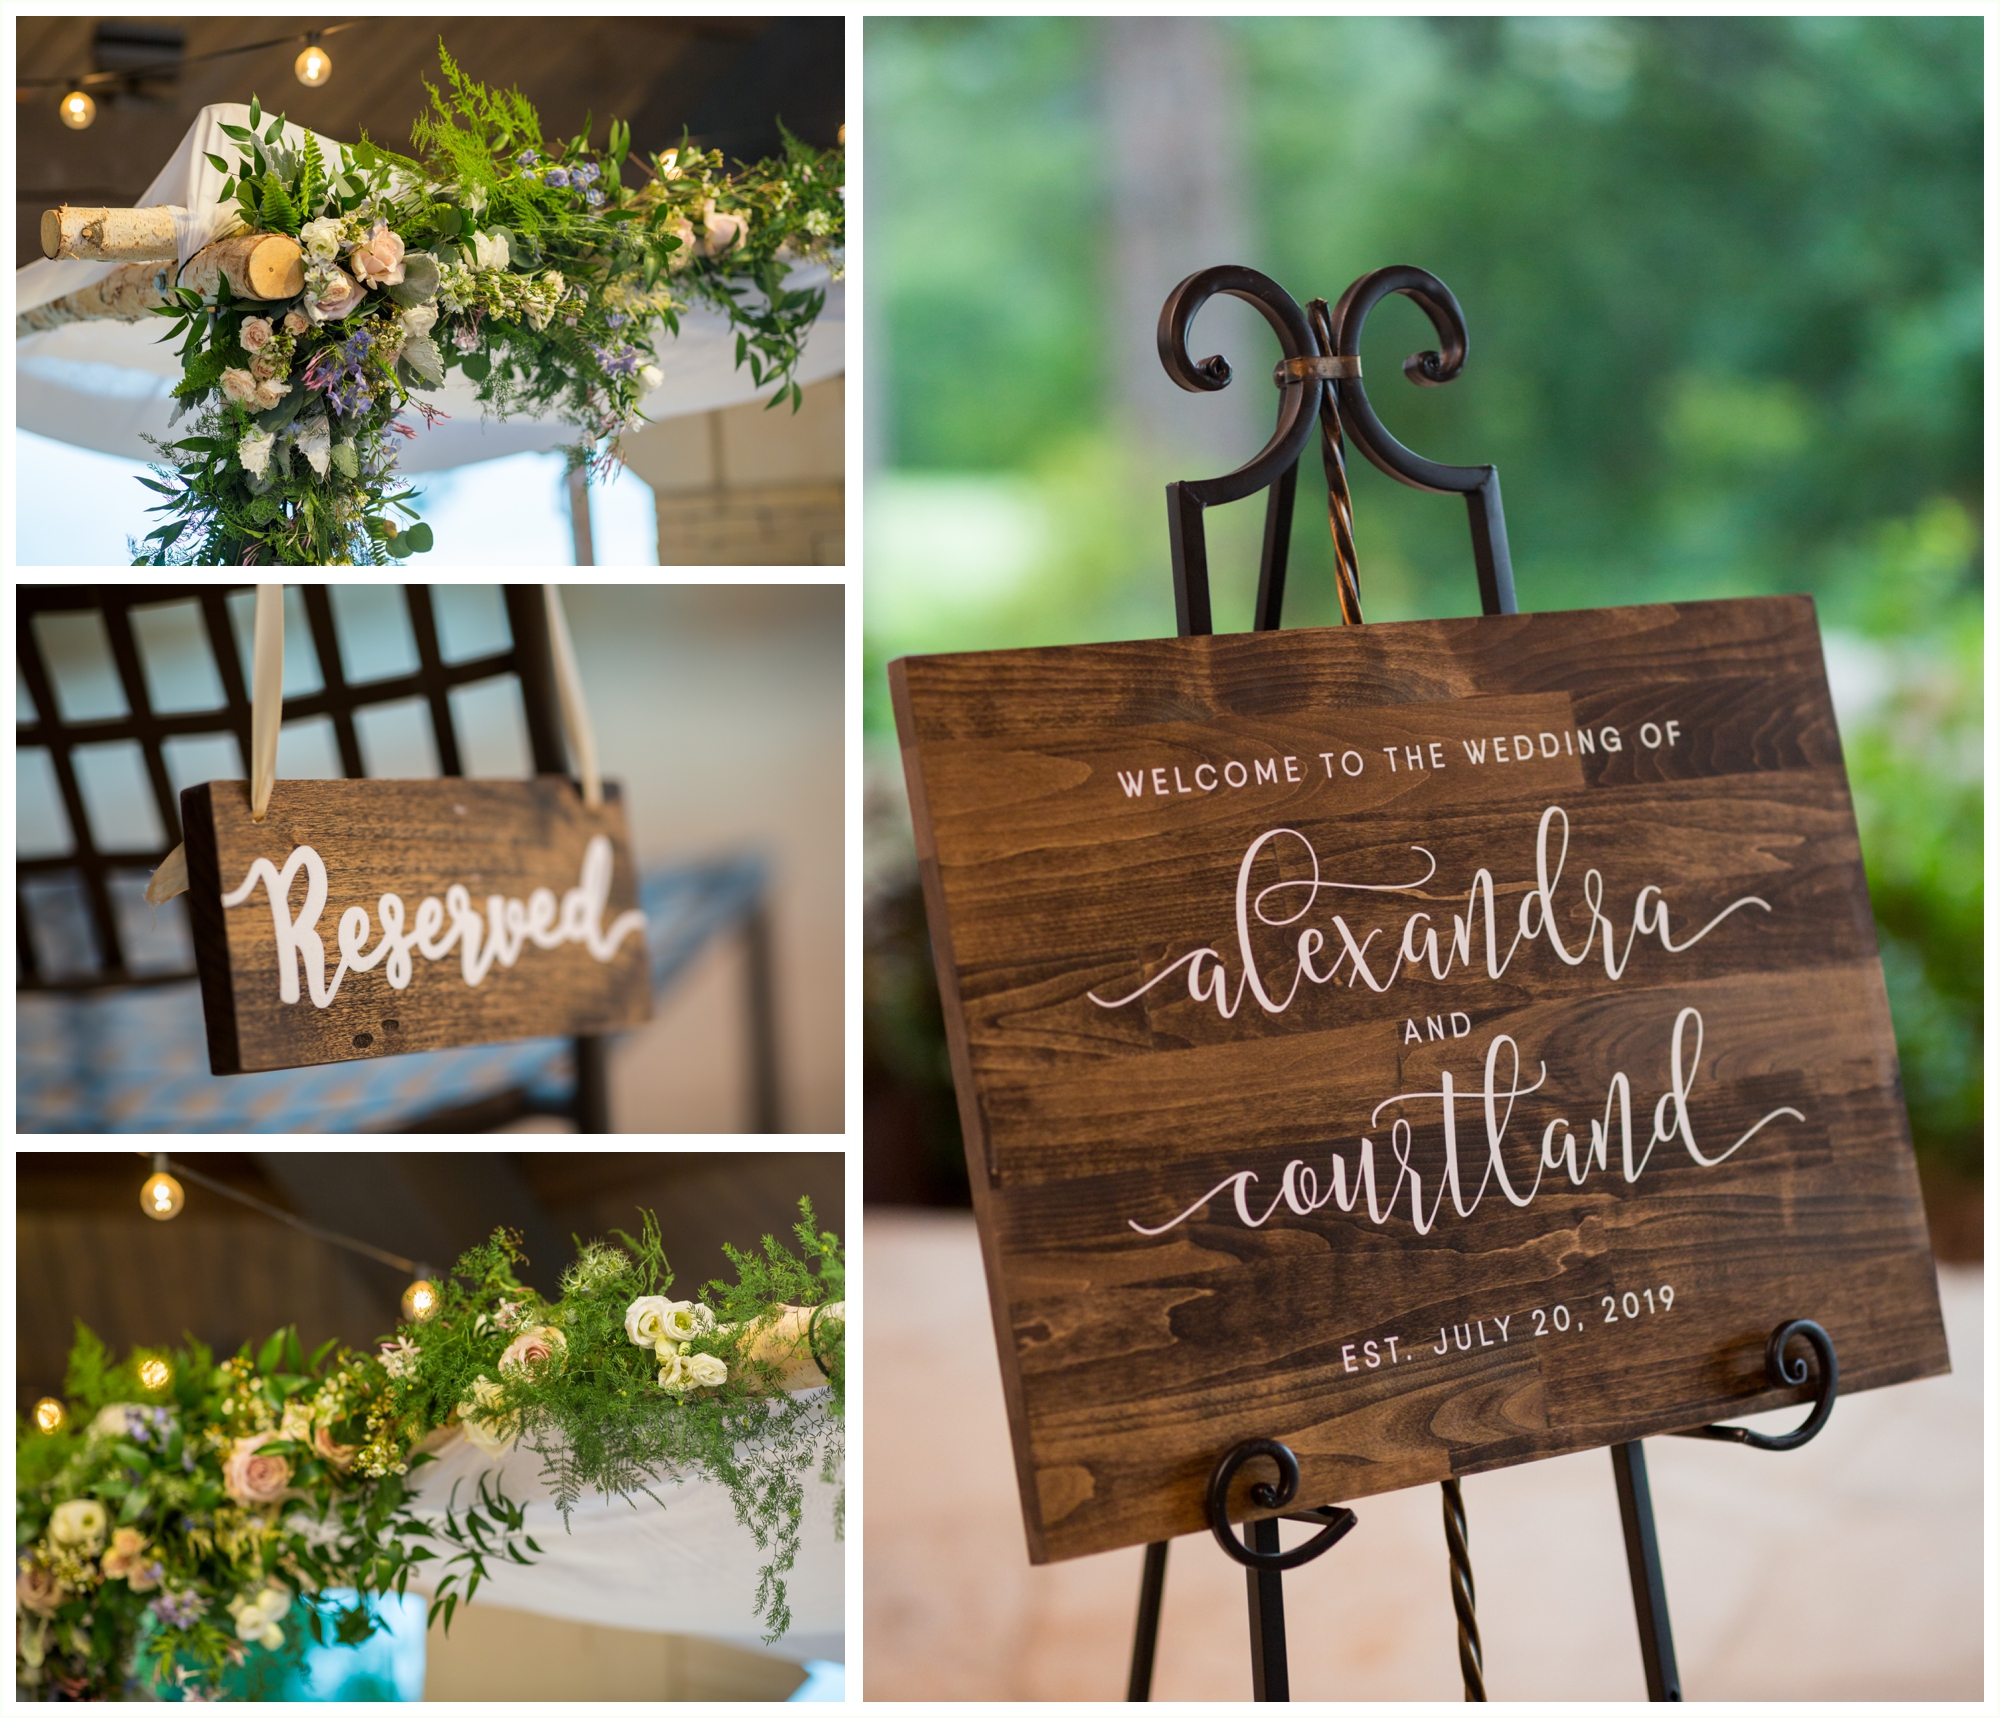 ceremony details wooden sign and floral arch